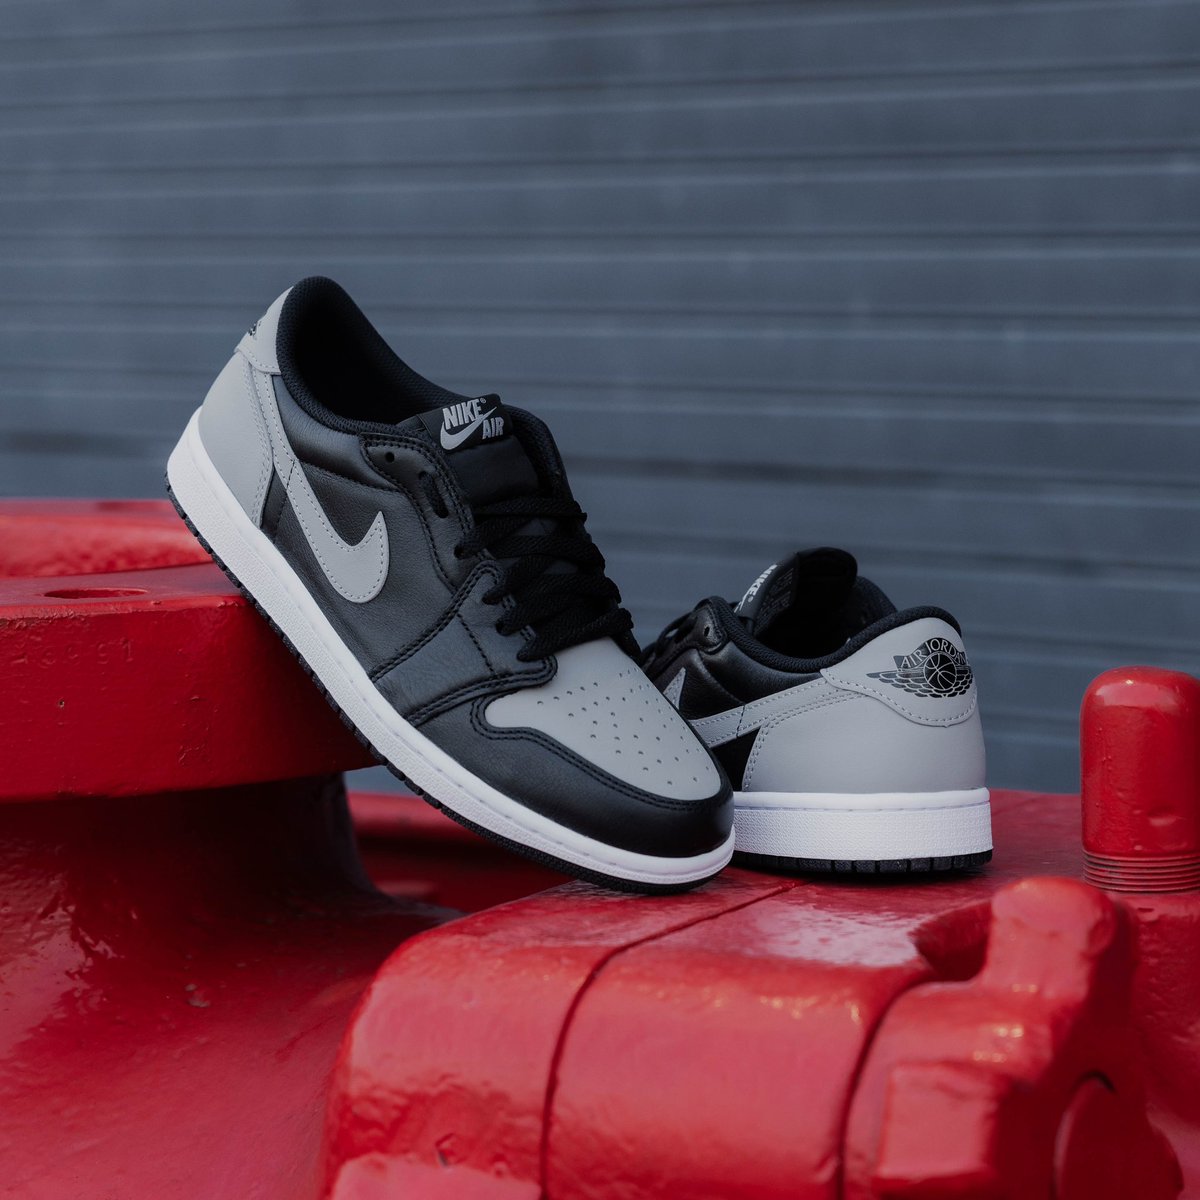 Air Jordan 1 Low “Shadow” Mens Sizes 8-14 ($140) Welcome back a classic; the Jordan 1 Low “Shadow”. This time it arrives in truest fashion close to the original medium grey color that adorns the sneaker. Drop a ☑️ to secure your pair. Pick these up on 5/11 at 9 AM CST First…